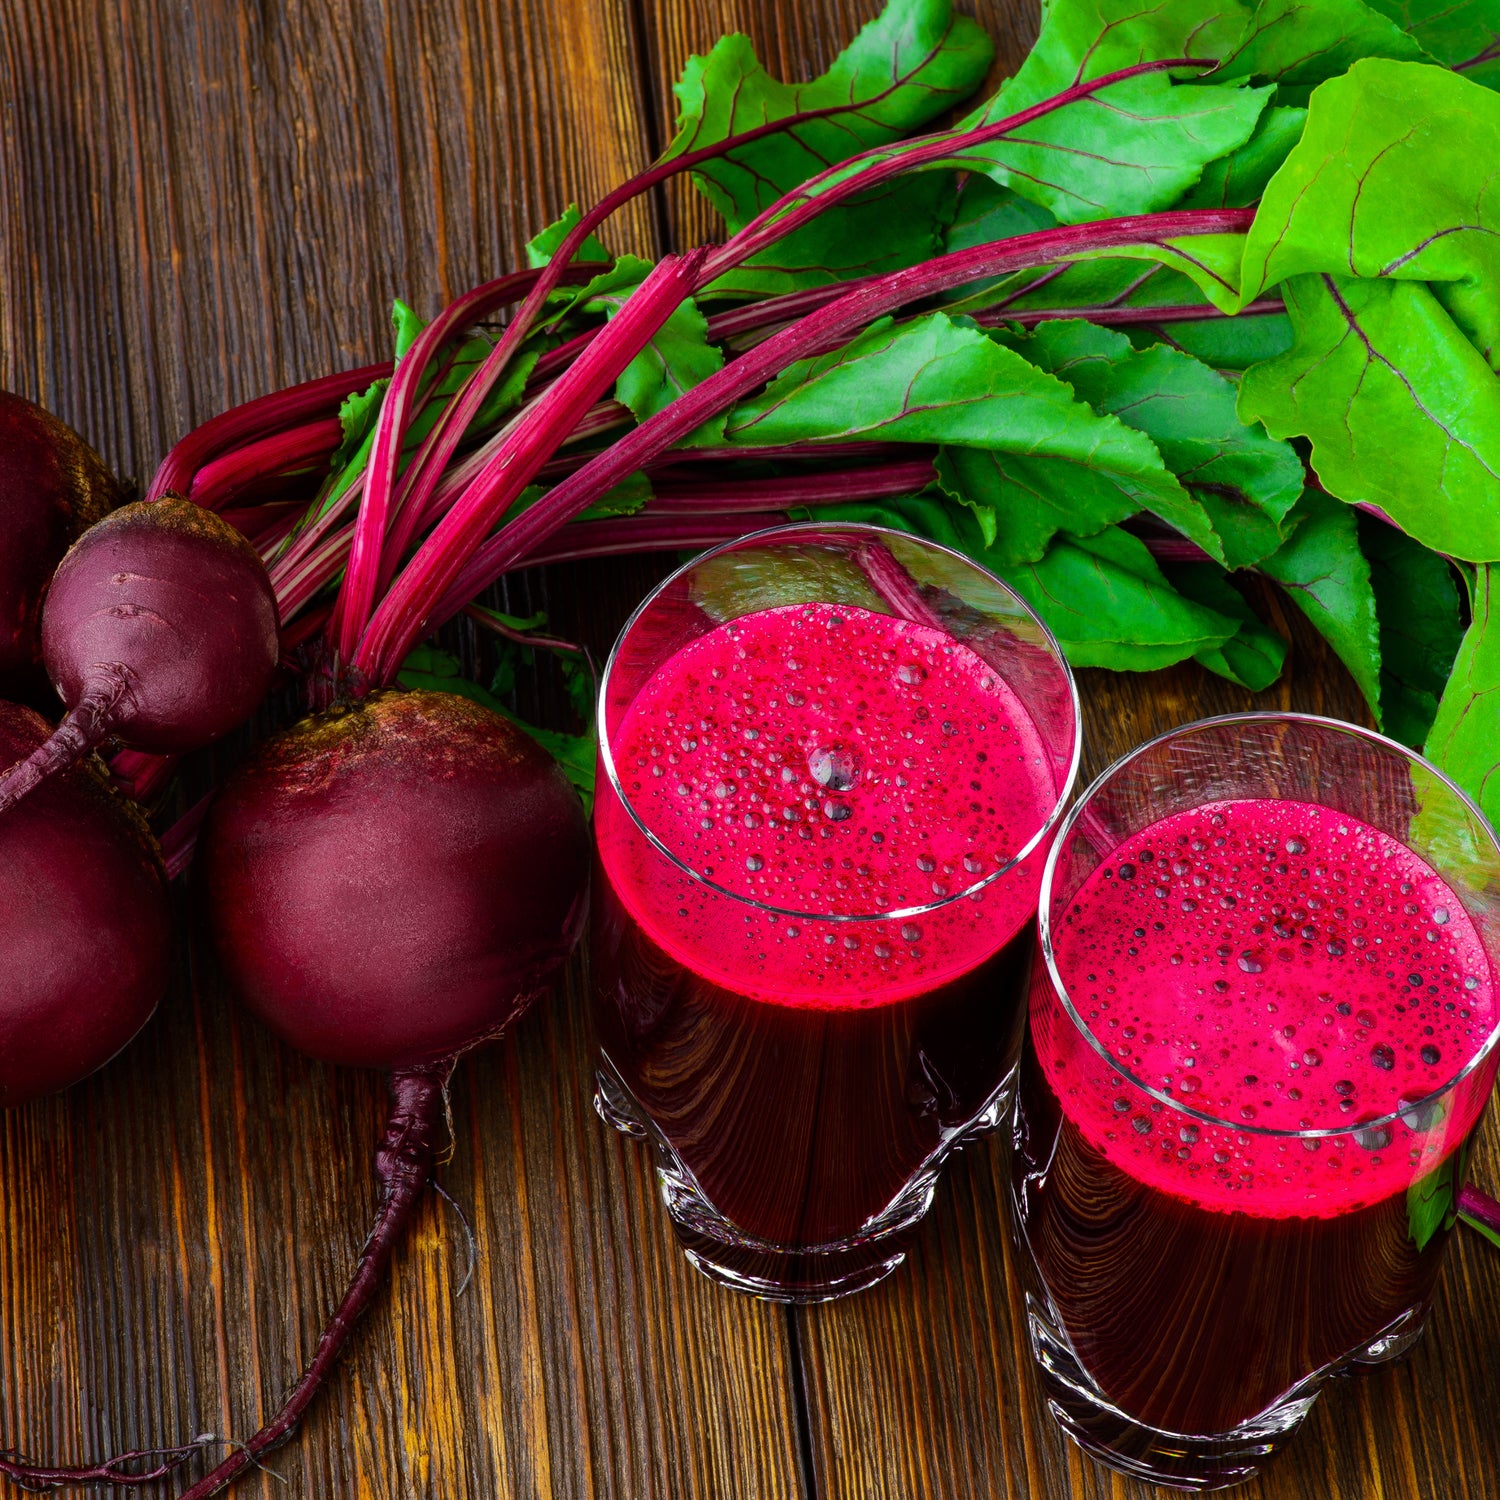 https://cdn.outsideonline.com/wp-content/uploads/2016/07/28/beets-and-juice_s.jpg